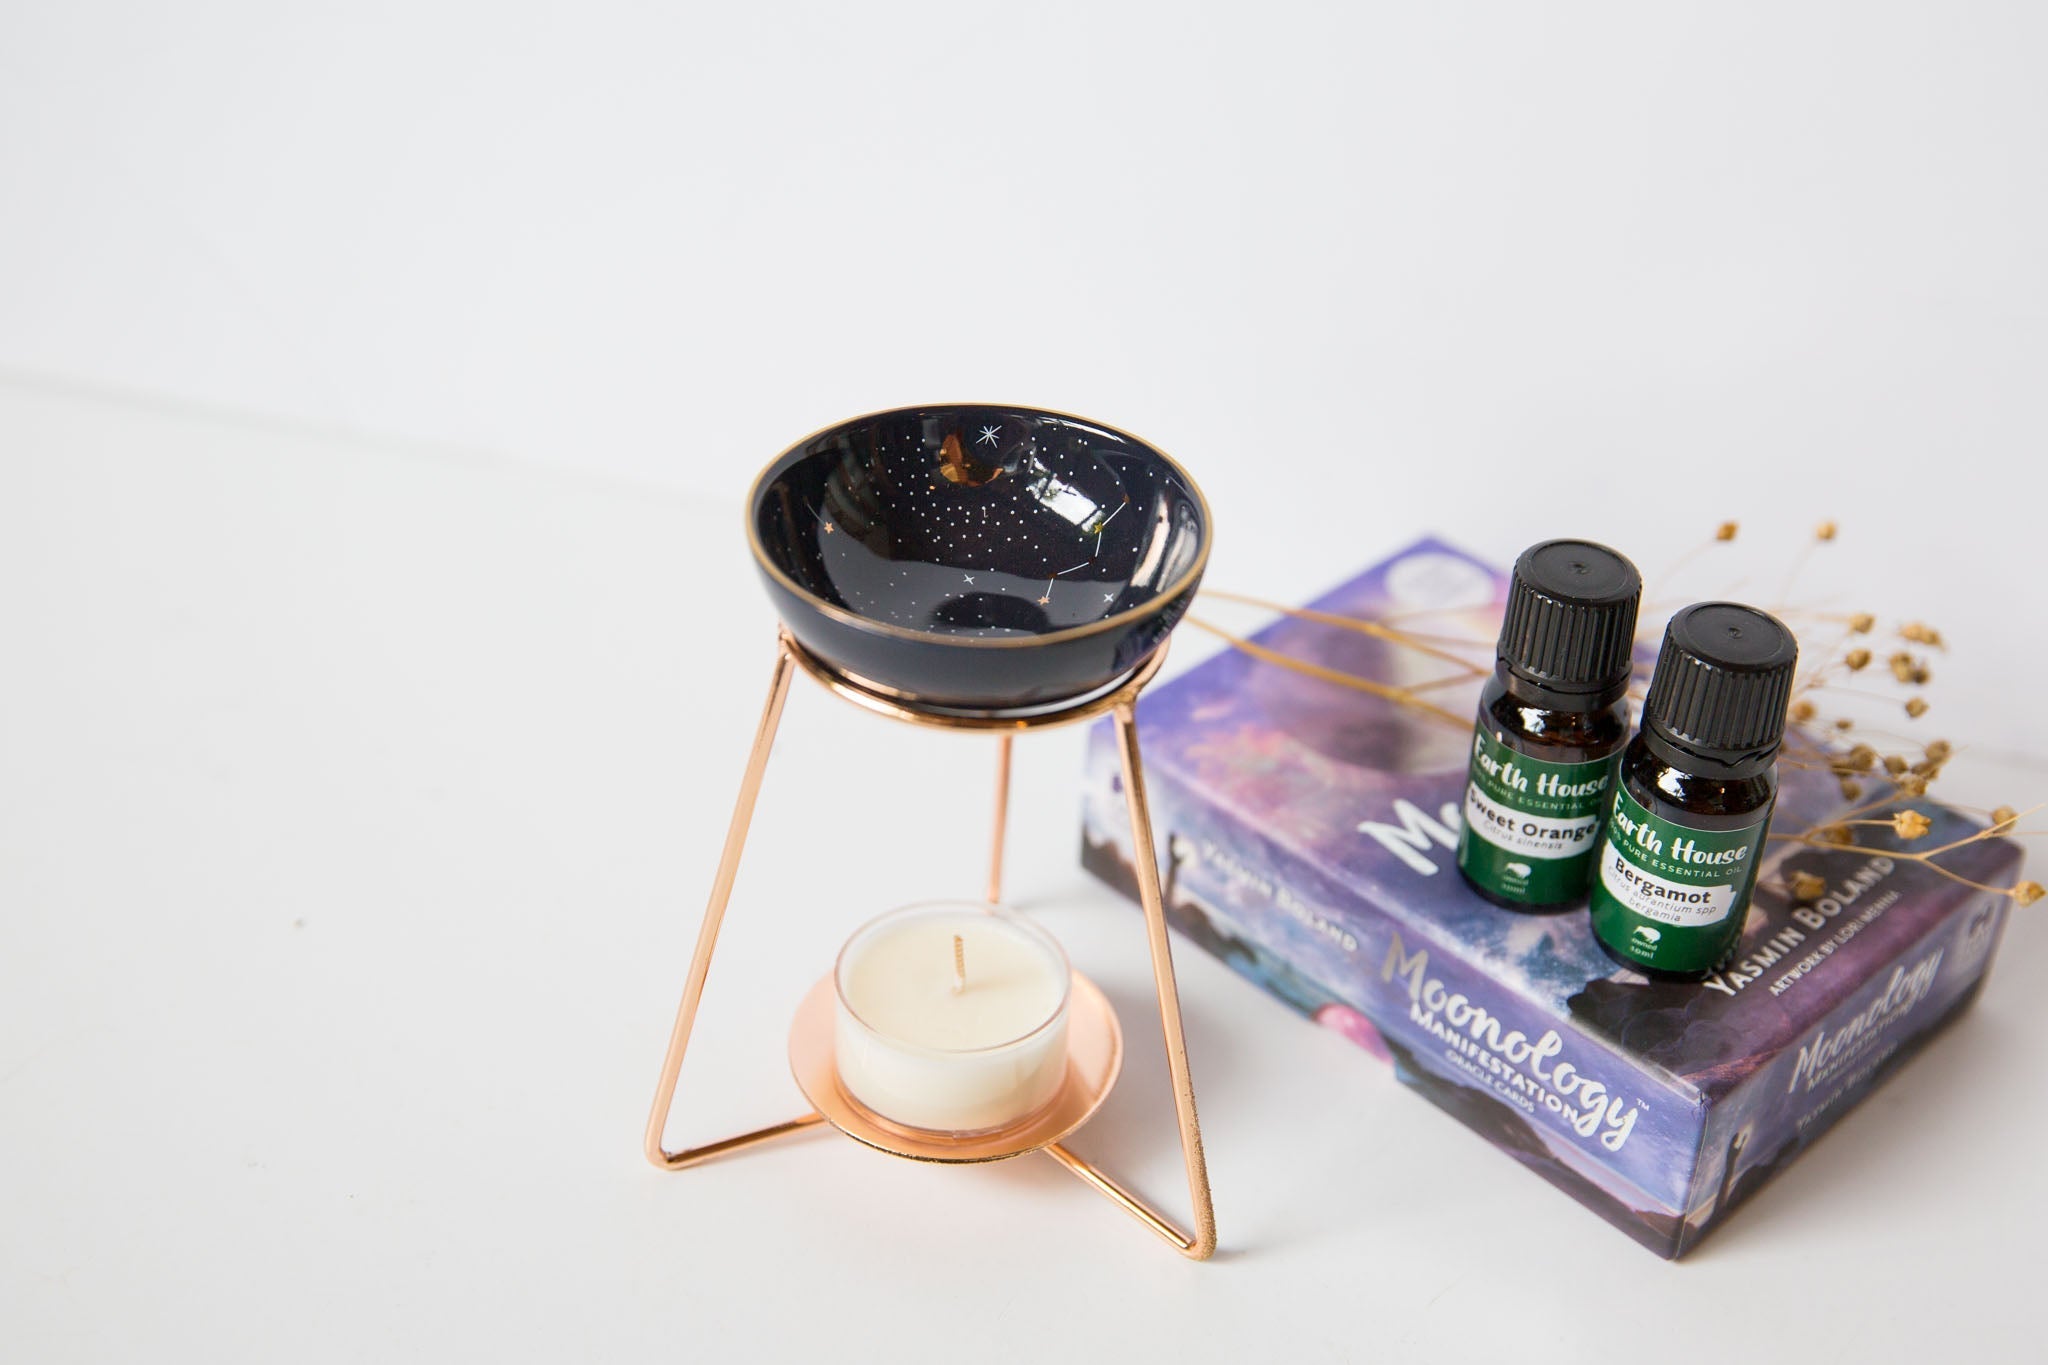 Constellation Oil Burner - Premium Crystals + Gifts from Clarity Co. - NZ's Favourite Online Crystal Shop